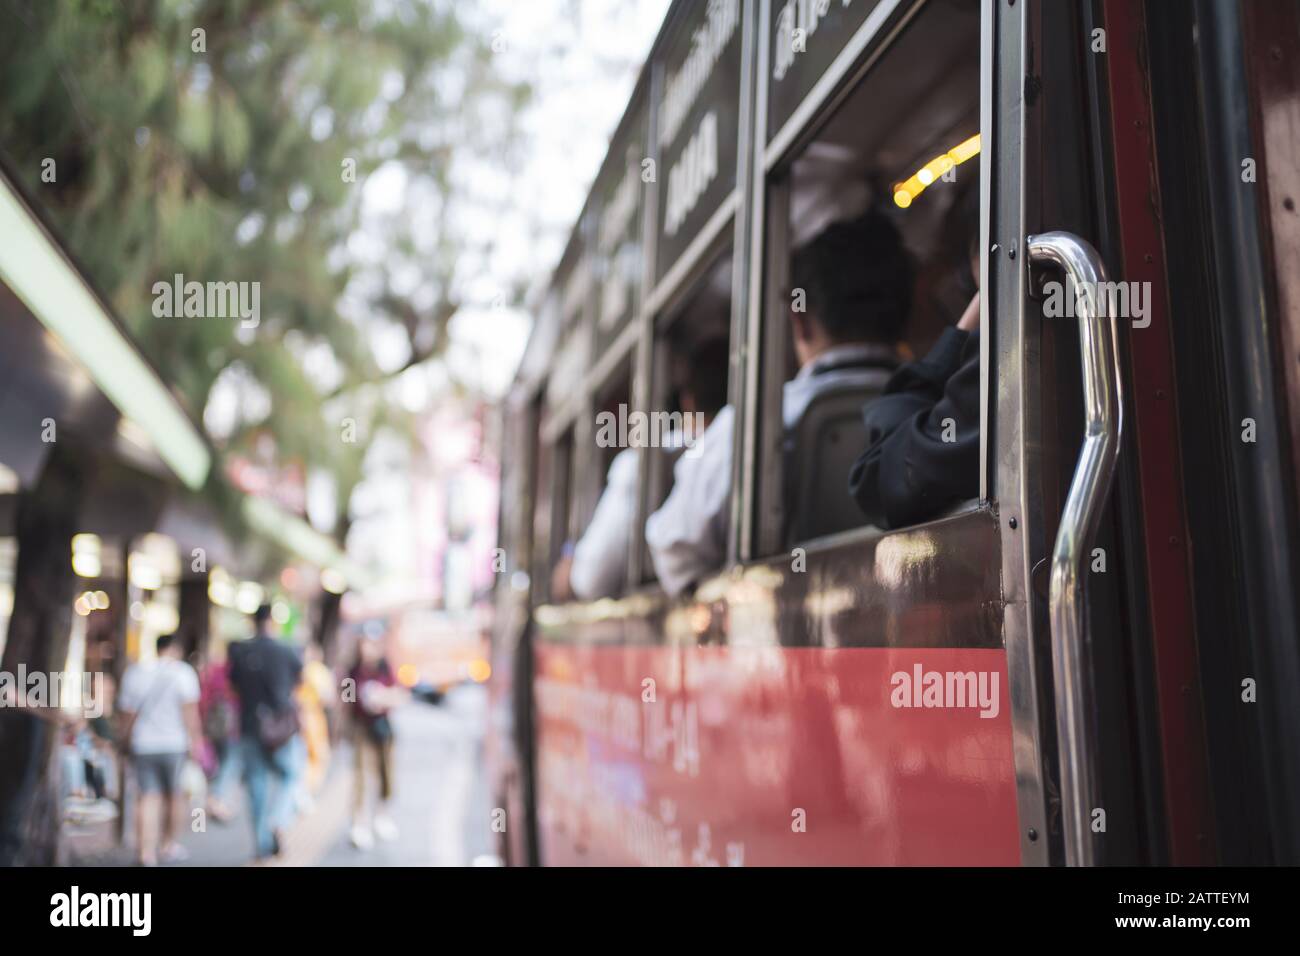 Open air public bus stops at the bus stop in Thailand Stock Photo